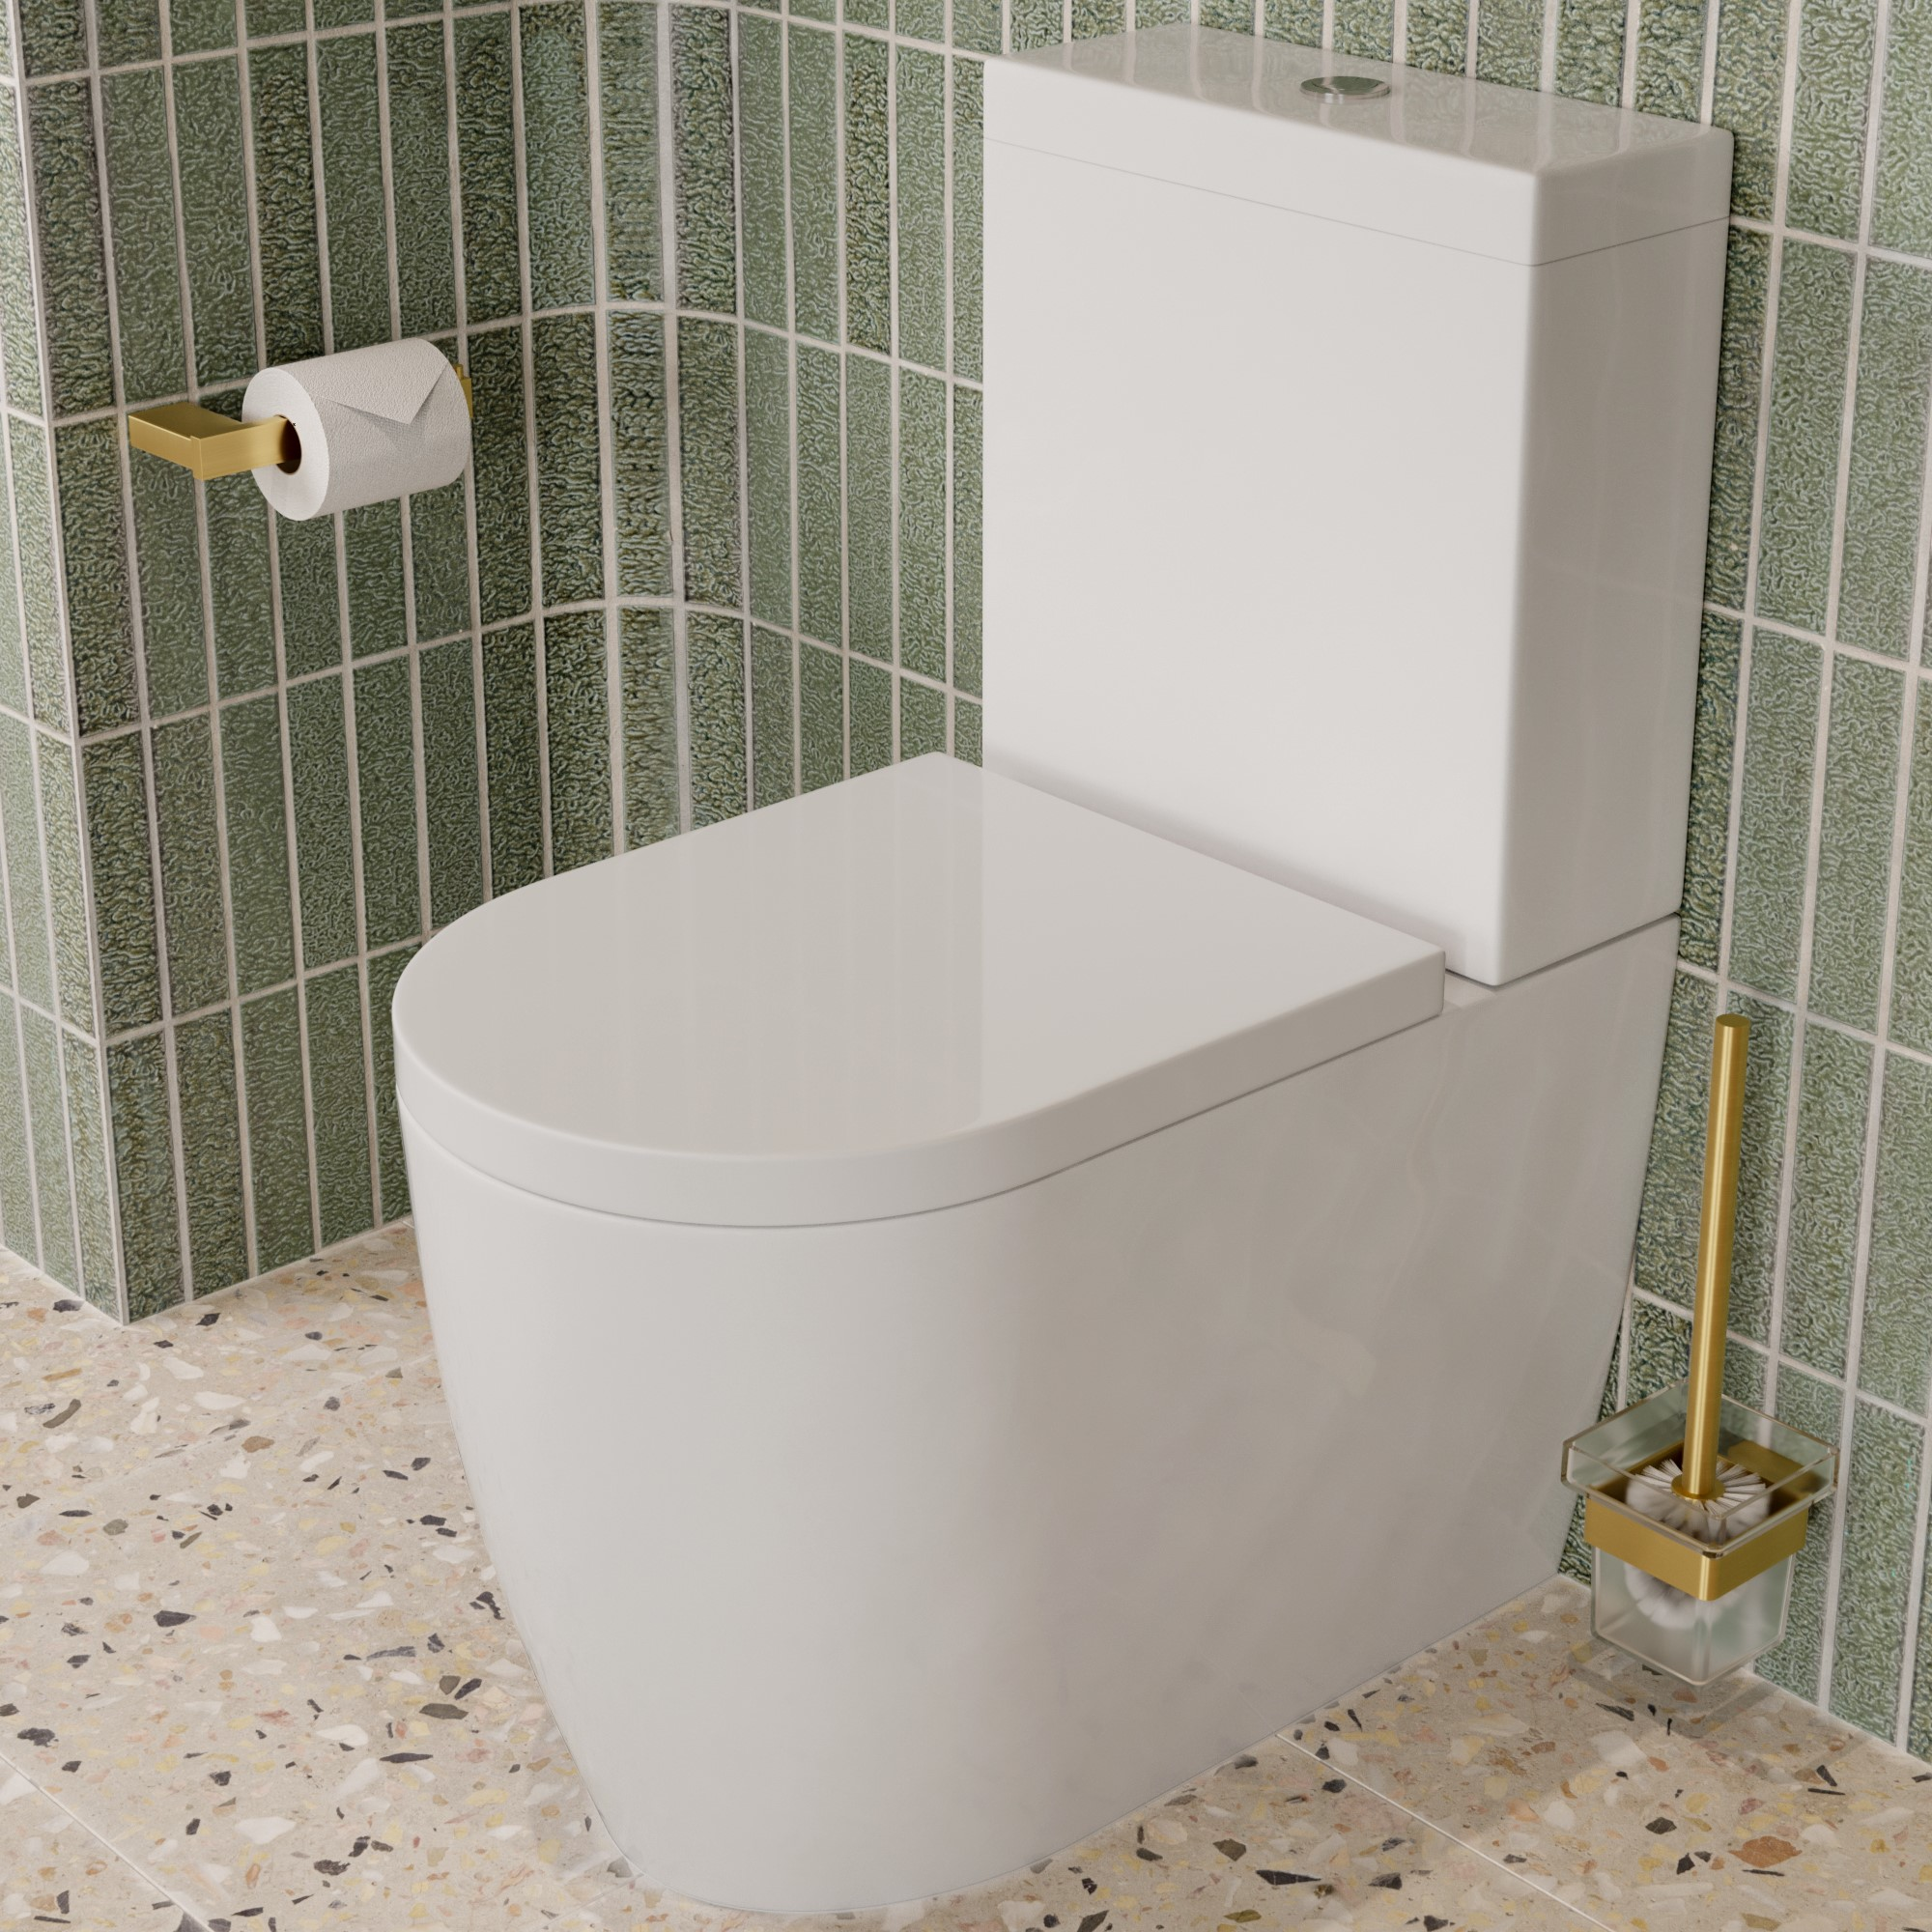 Saneux Uni close coupled pan, cistern and wrap over seat